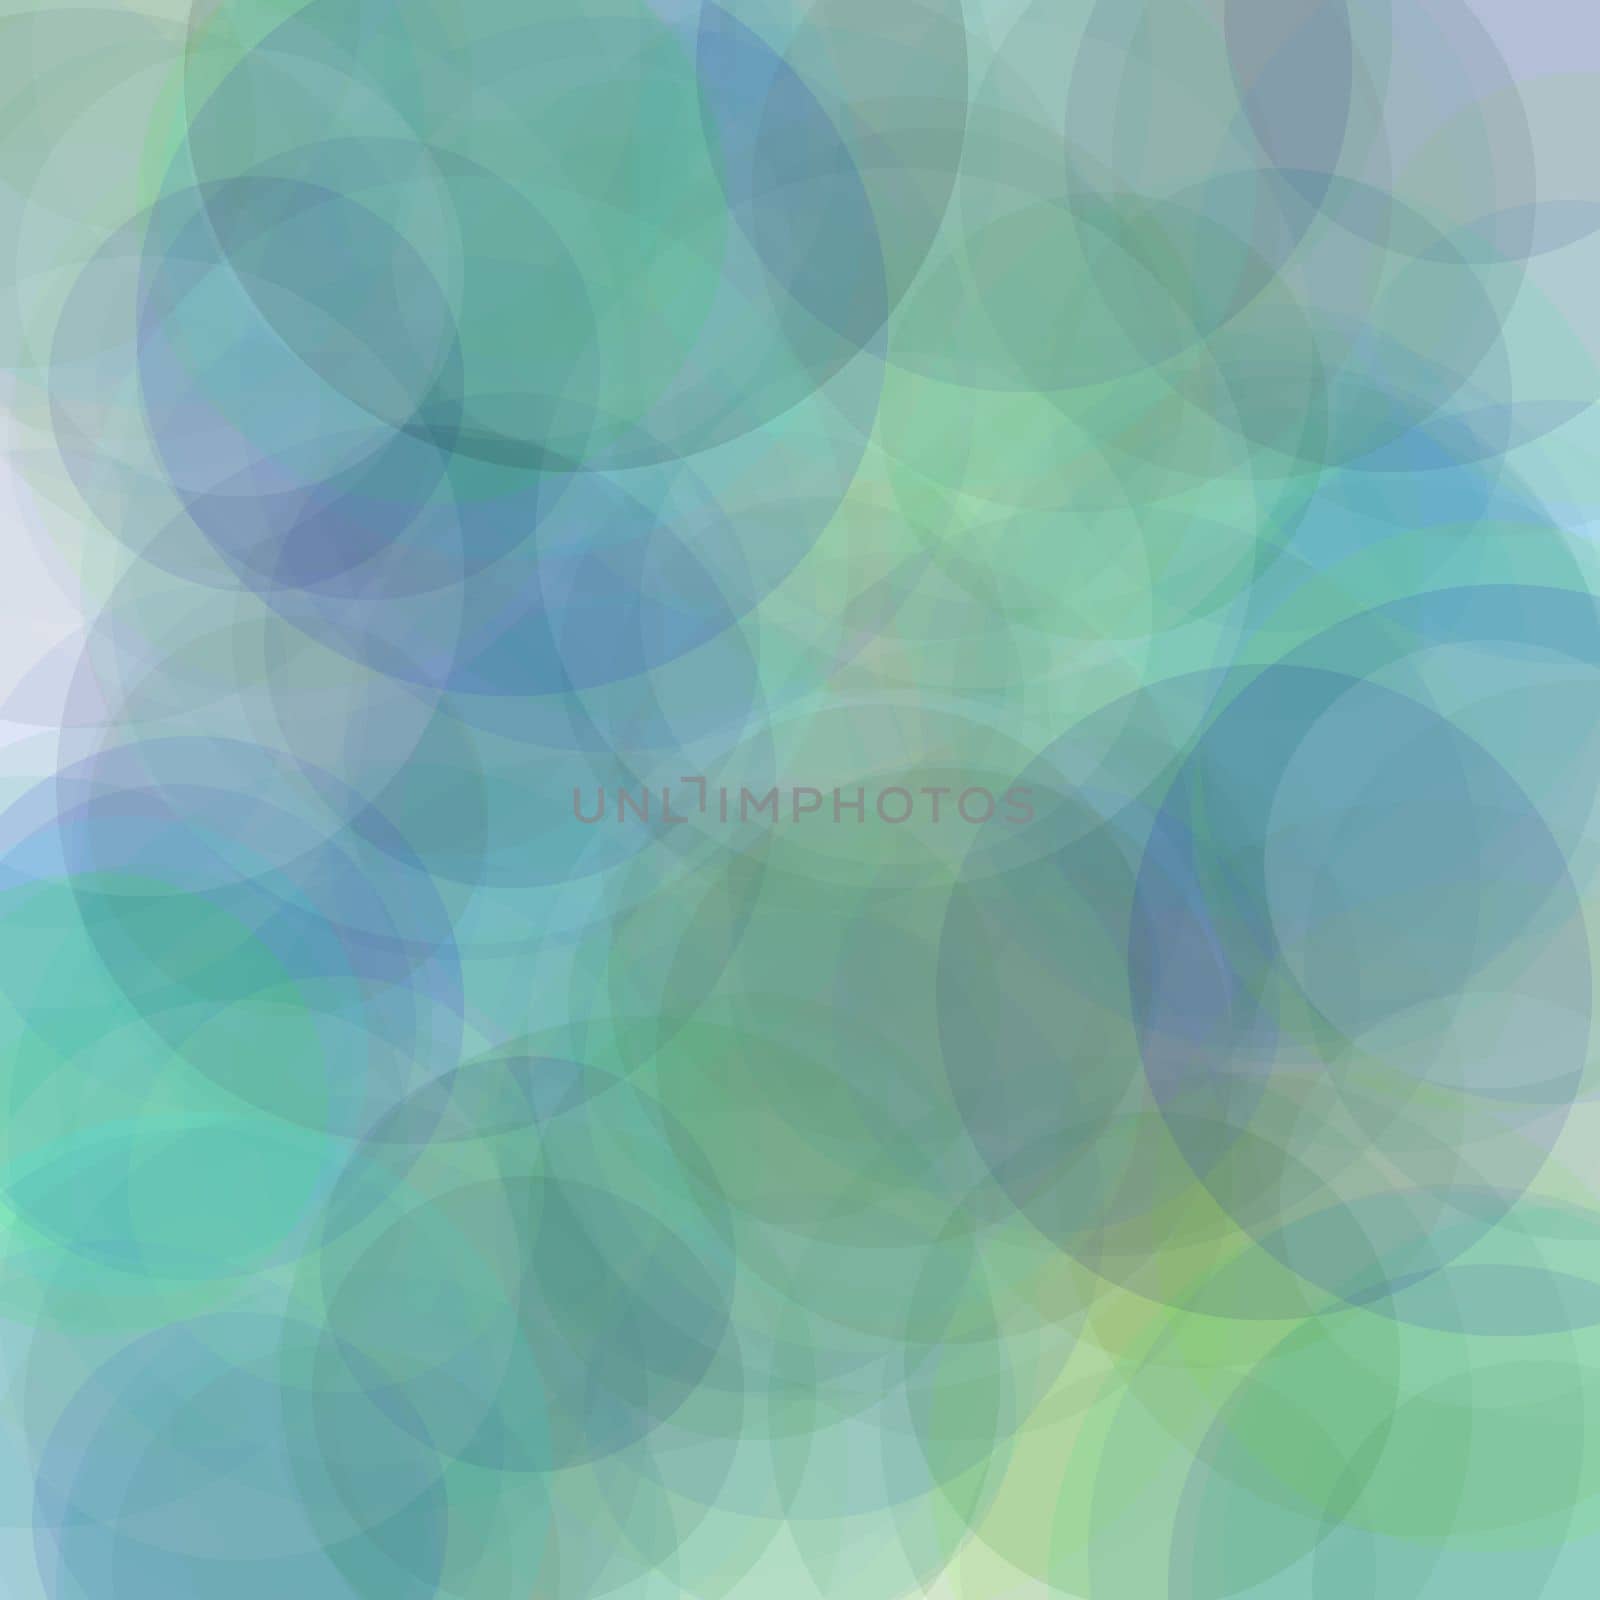 Abstract blue green grey circles illustration background by claudiodivizia